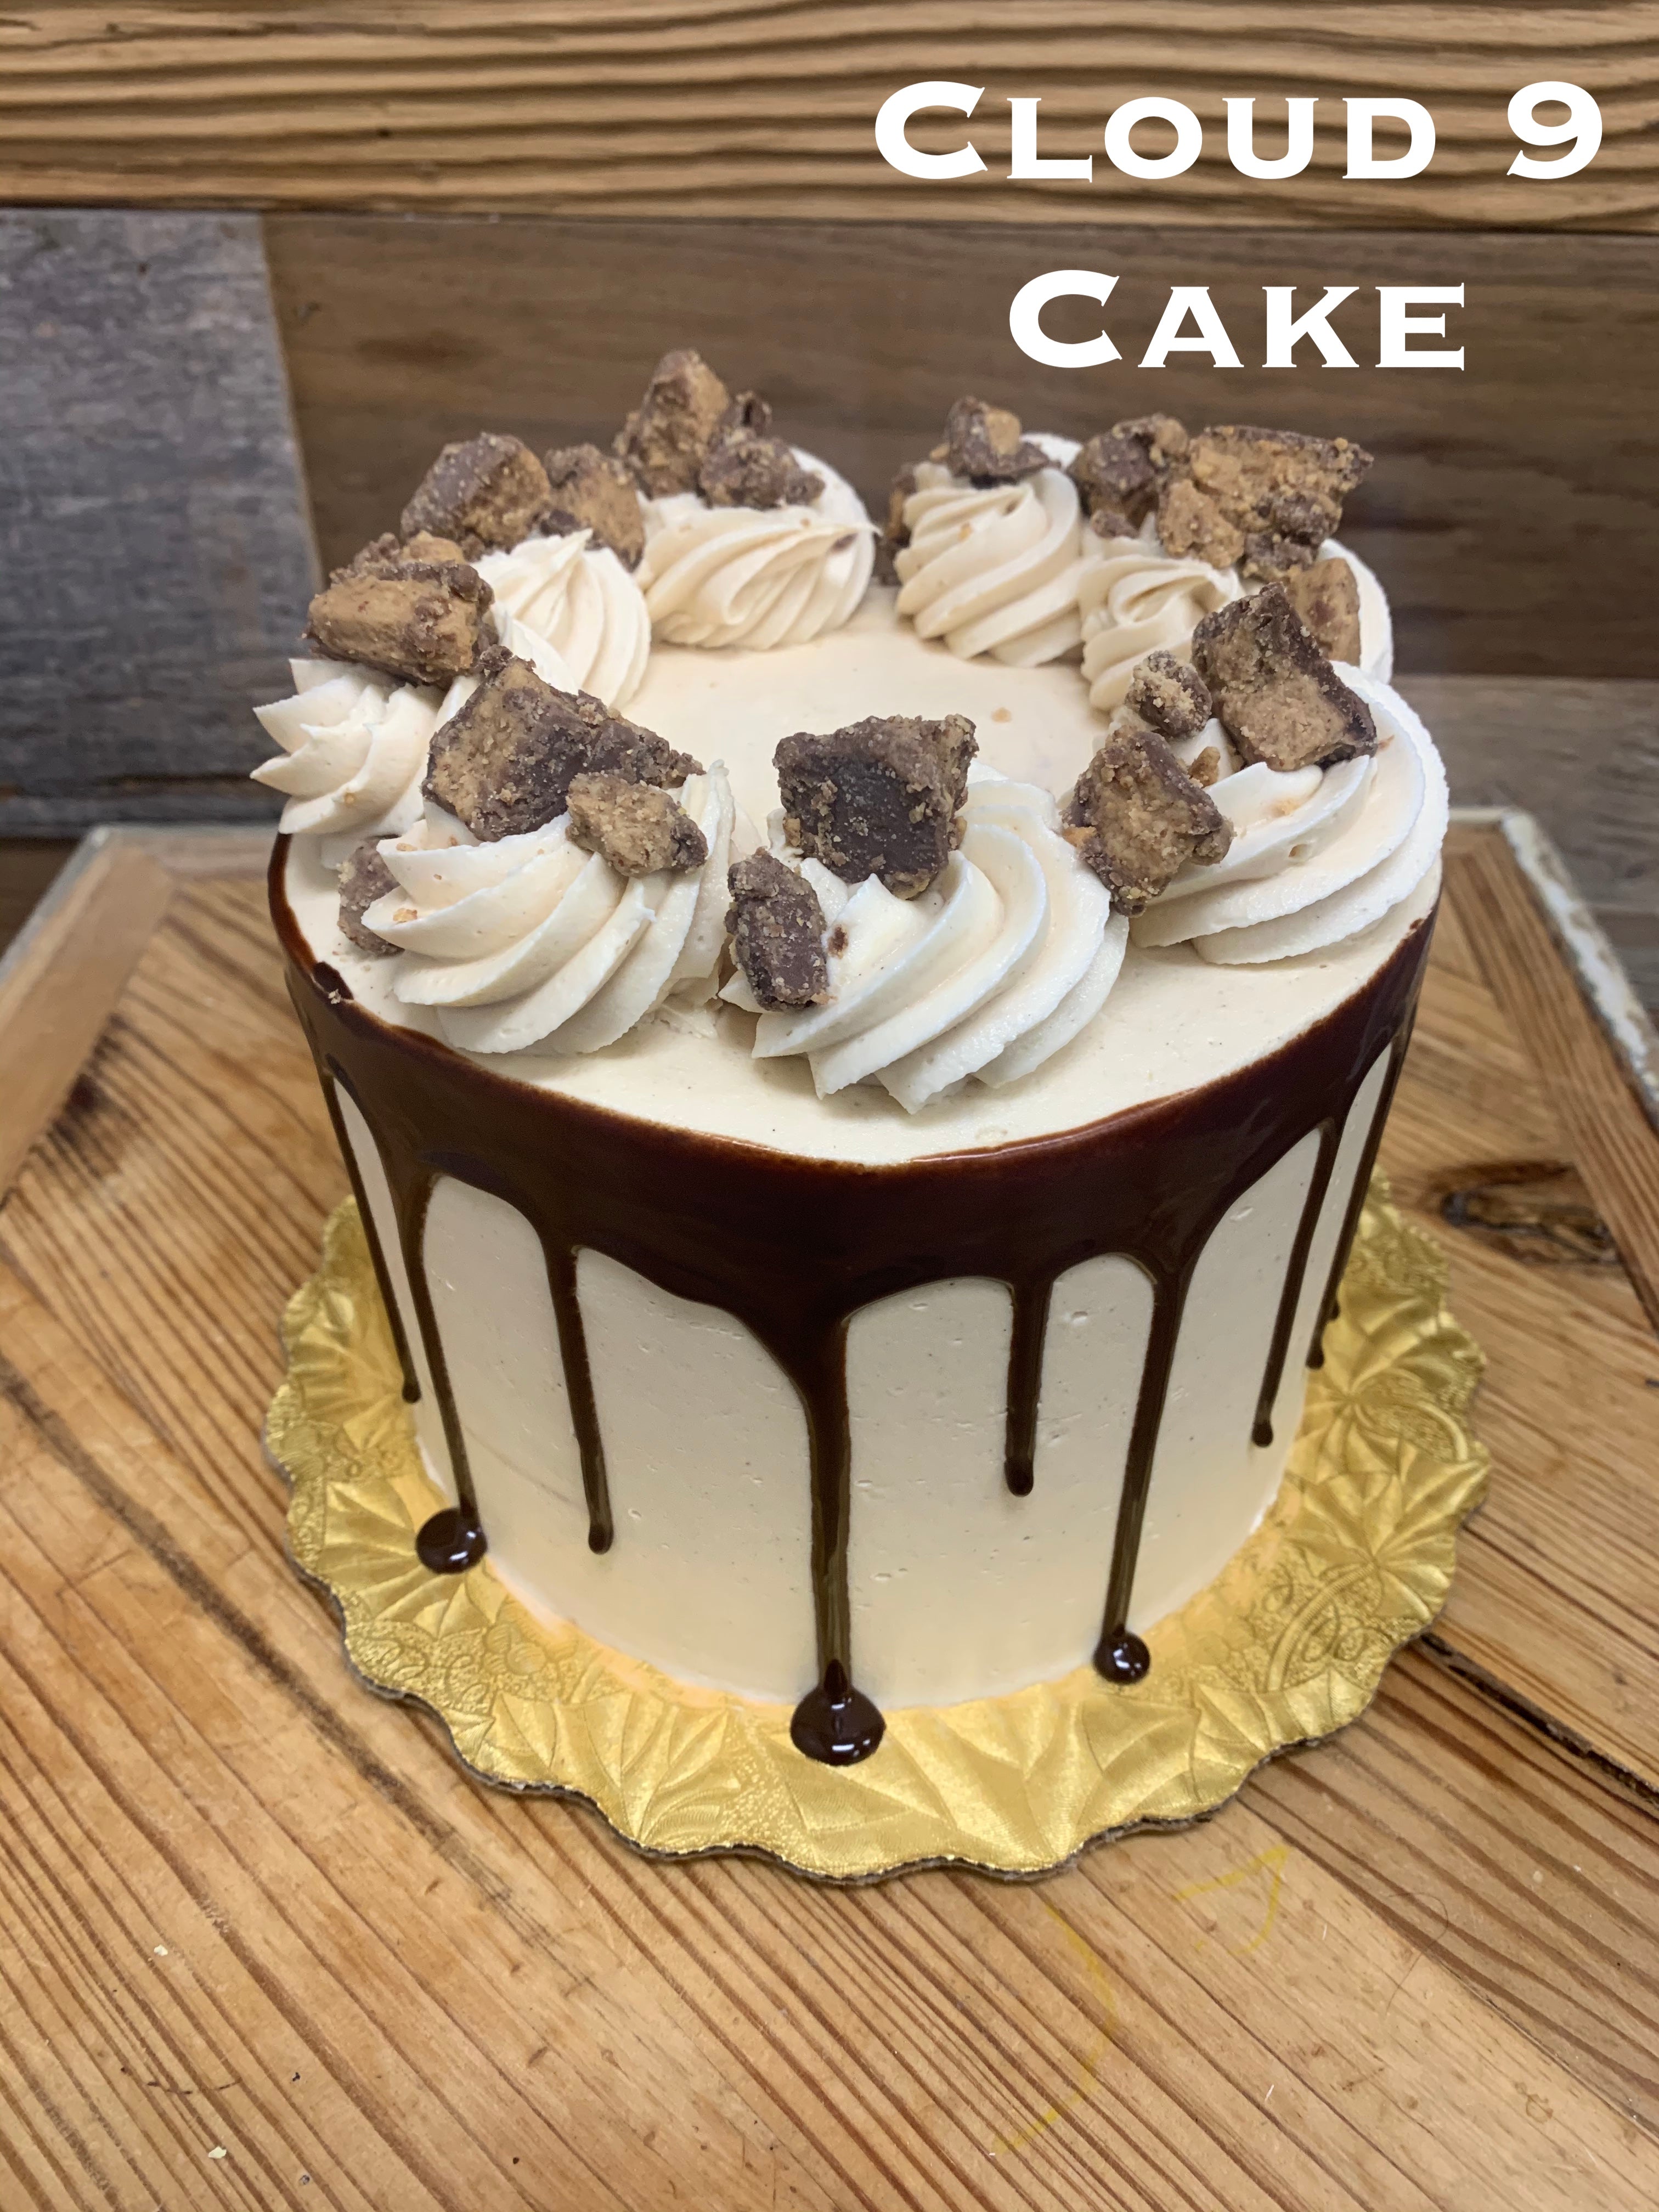 Floating On Cloud 9 Mile High Chocolate Cake - Recipe Roost